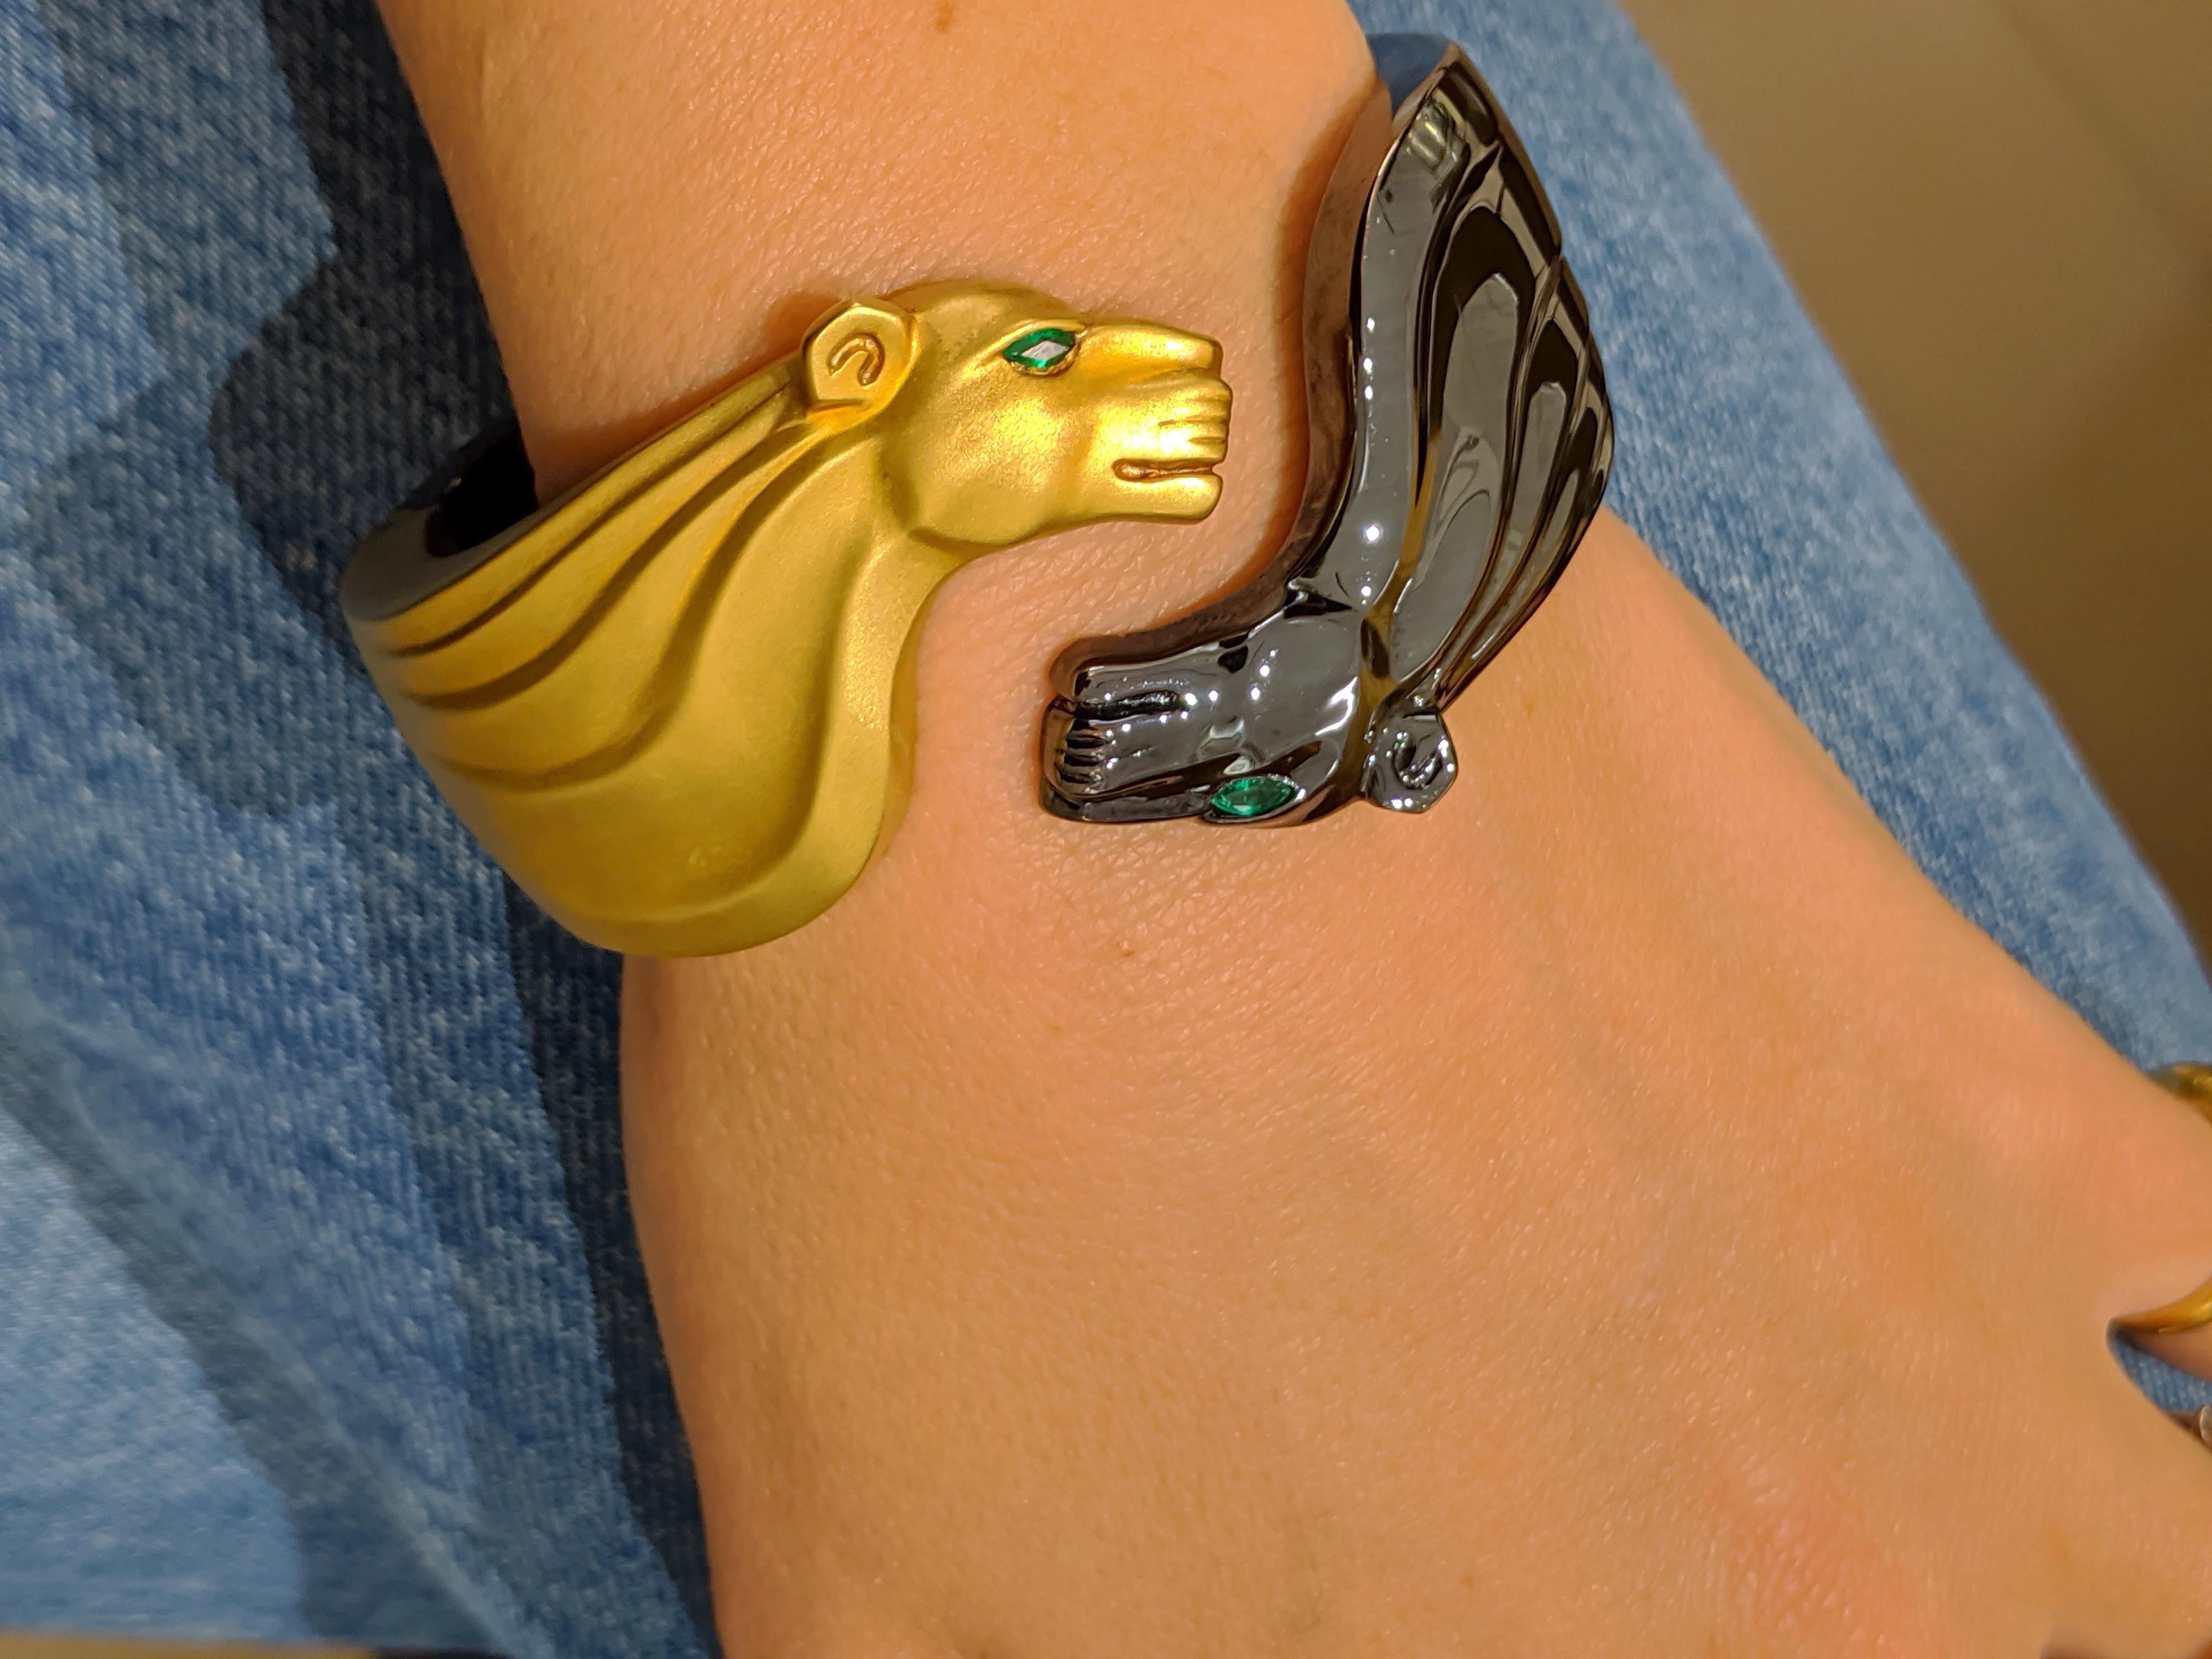 Yin Yang Panther Cuff Bracelet
One panther is crafted in 18 karat yellow gold with a satin finish, the other in sterling silver with a blackened finish. Each panther has a marquis cut Emerald eye. The bracelet is hinged allowing it to be put on